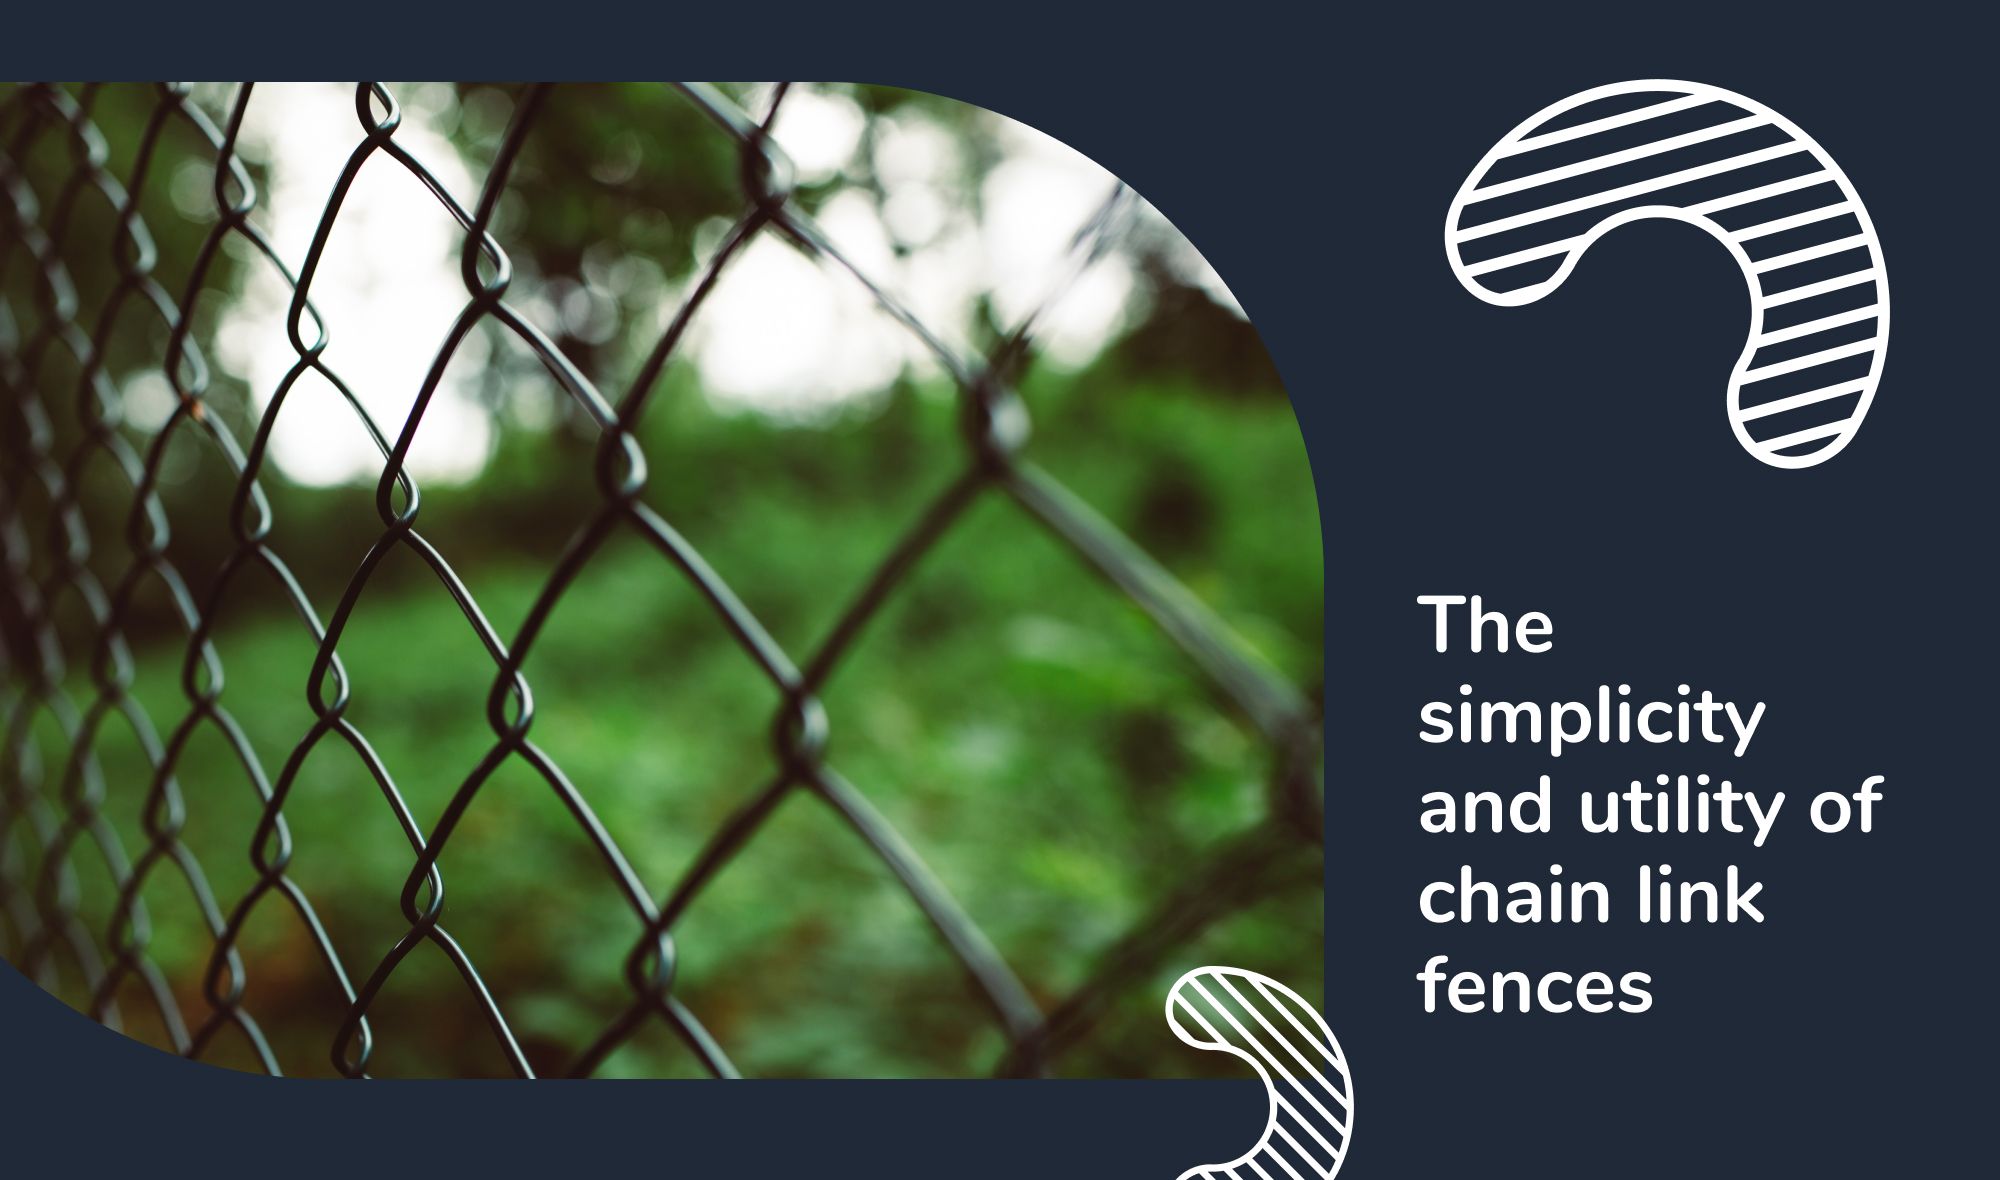 The simplicity and utility of chain link fences